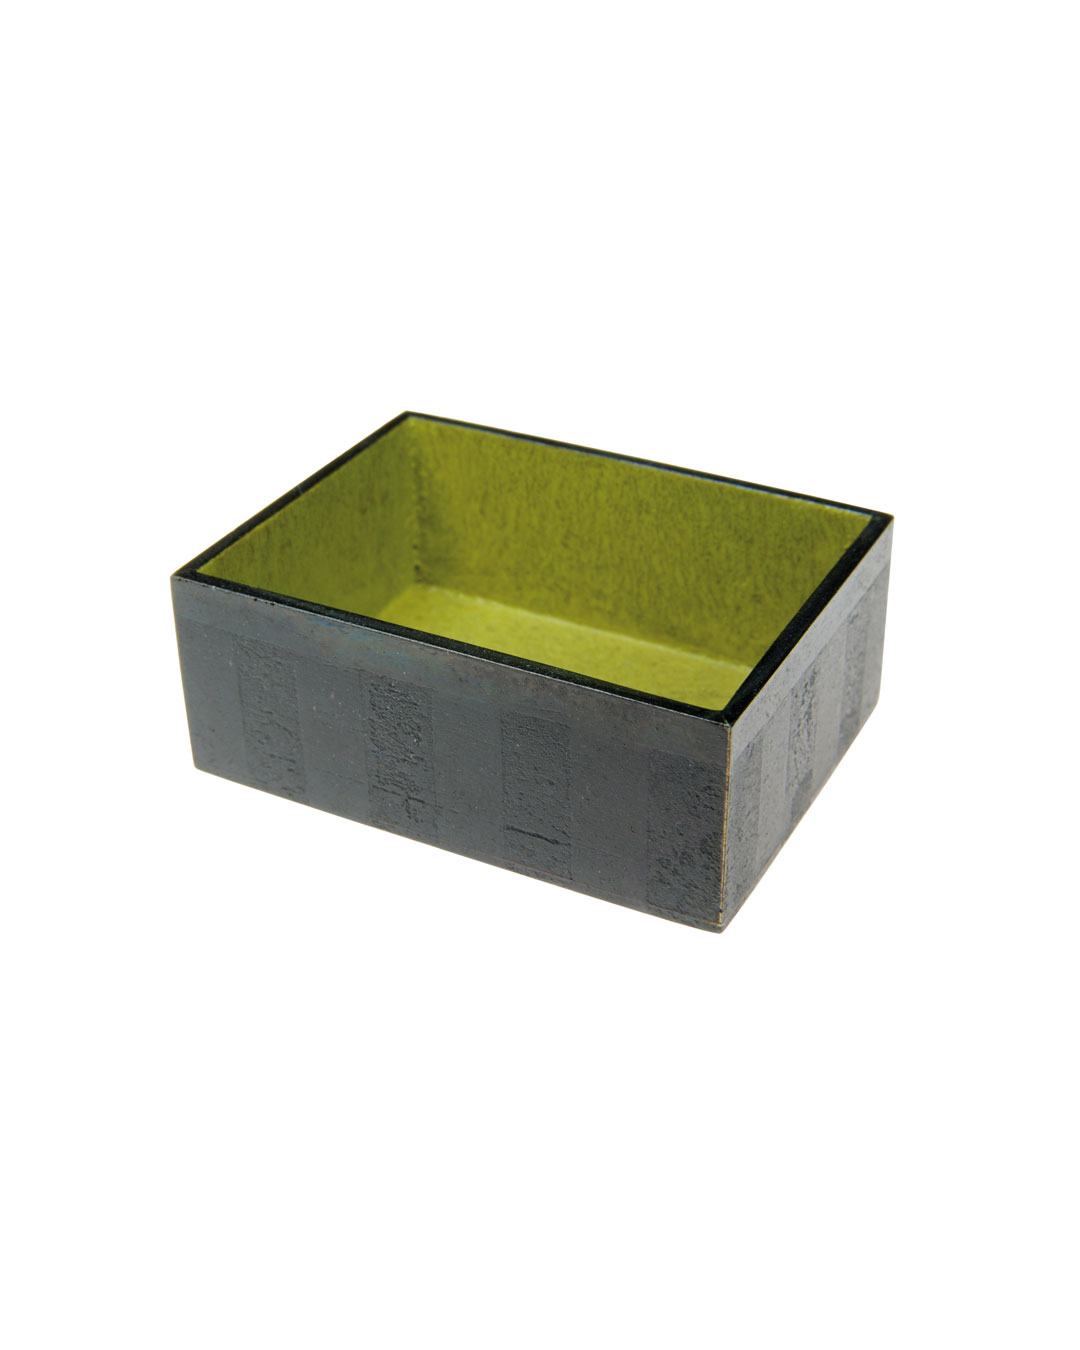 Tore Svensson, Box, 2009, brooch; etched and painted steel, 40 x 30 x 15 mm, €560